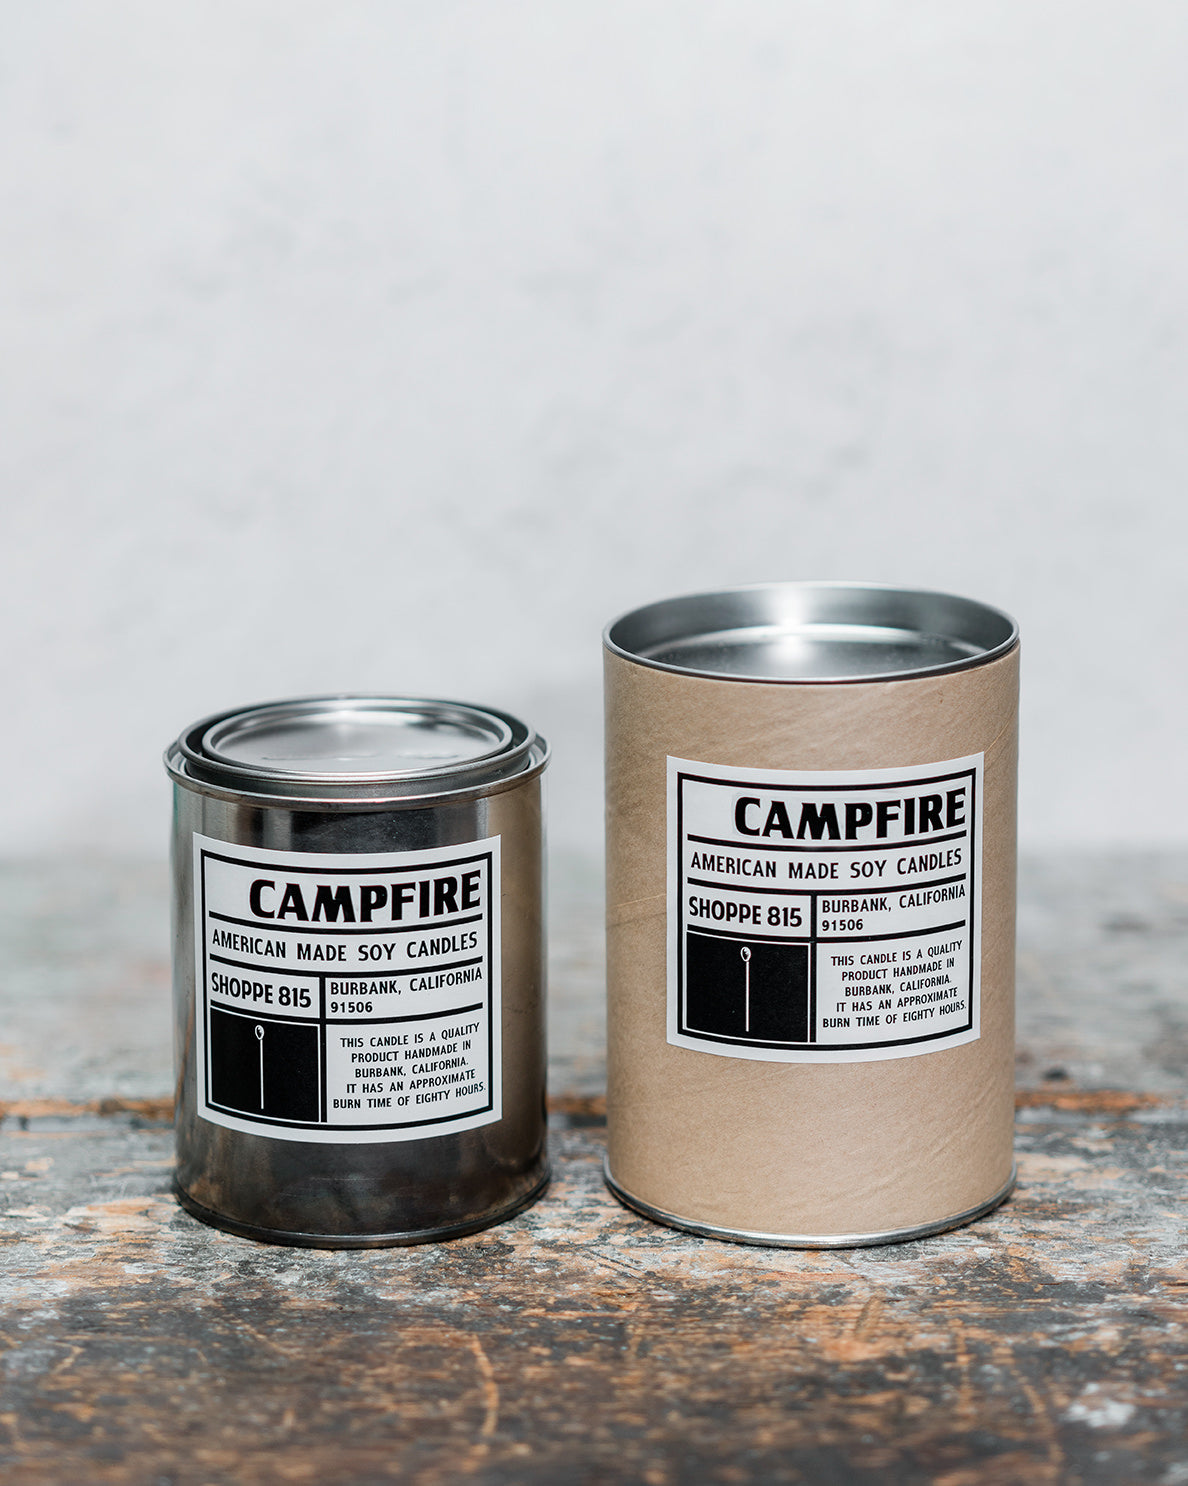 Campfire gender neutral tin candle on wooden shelf with packaging